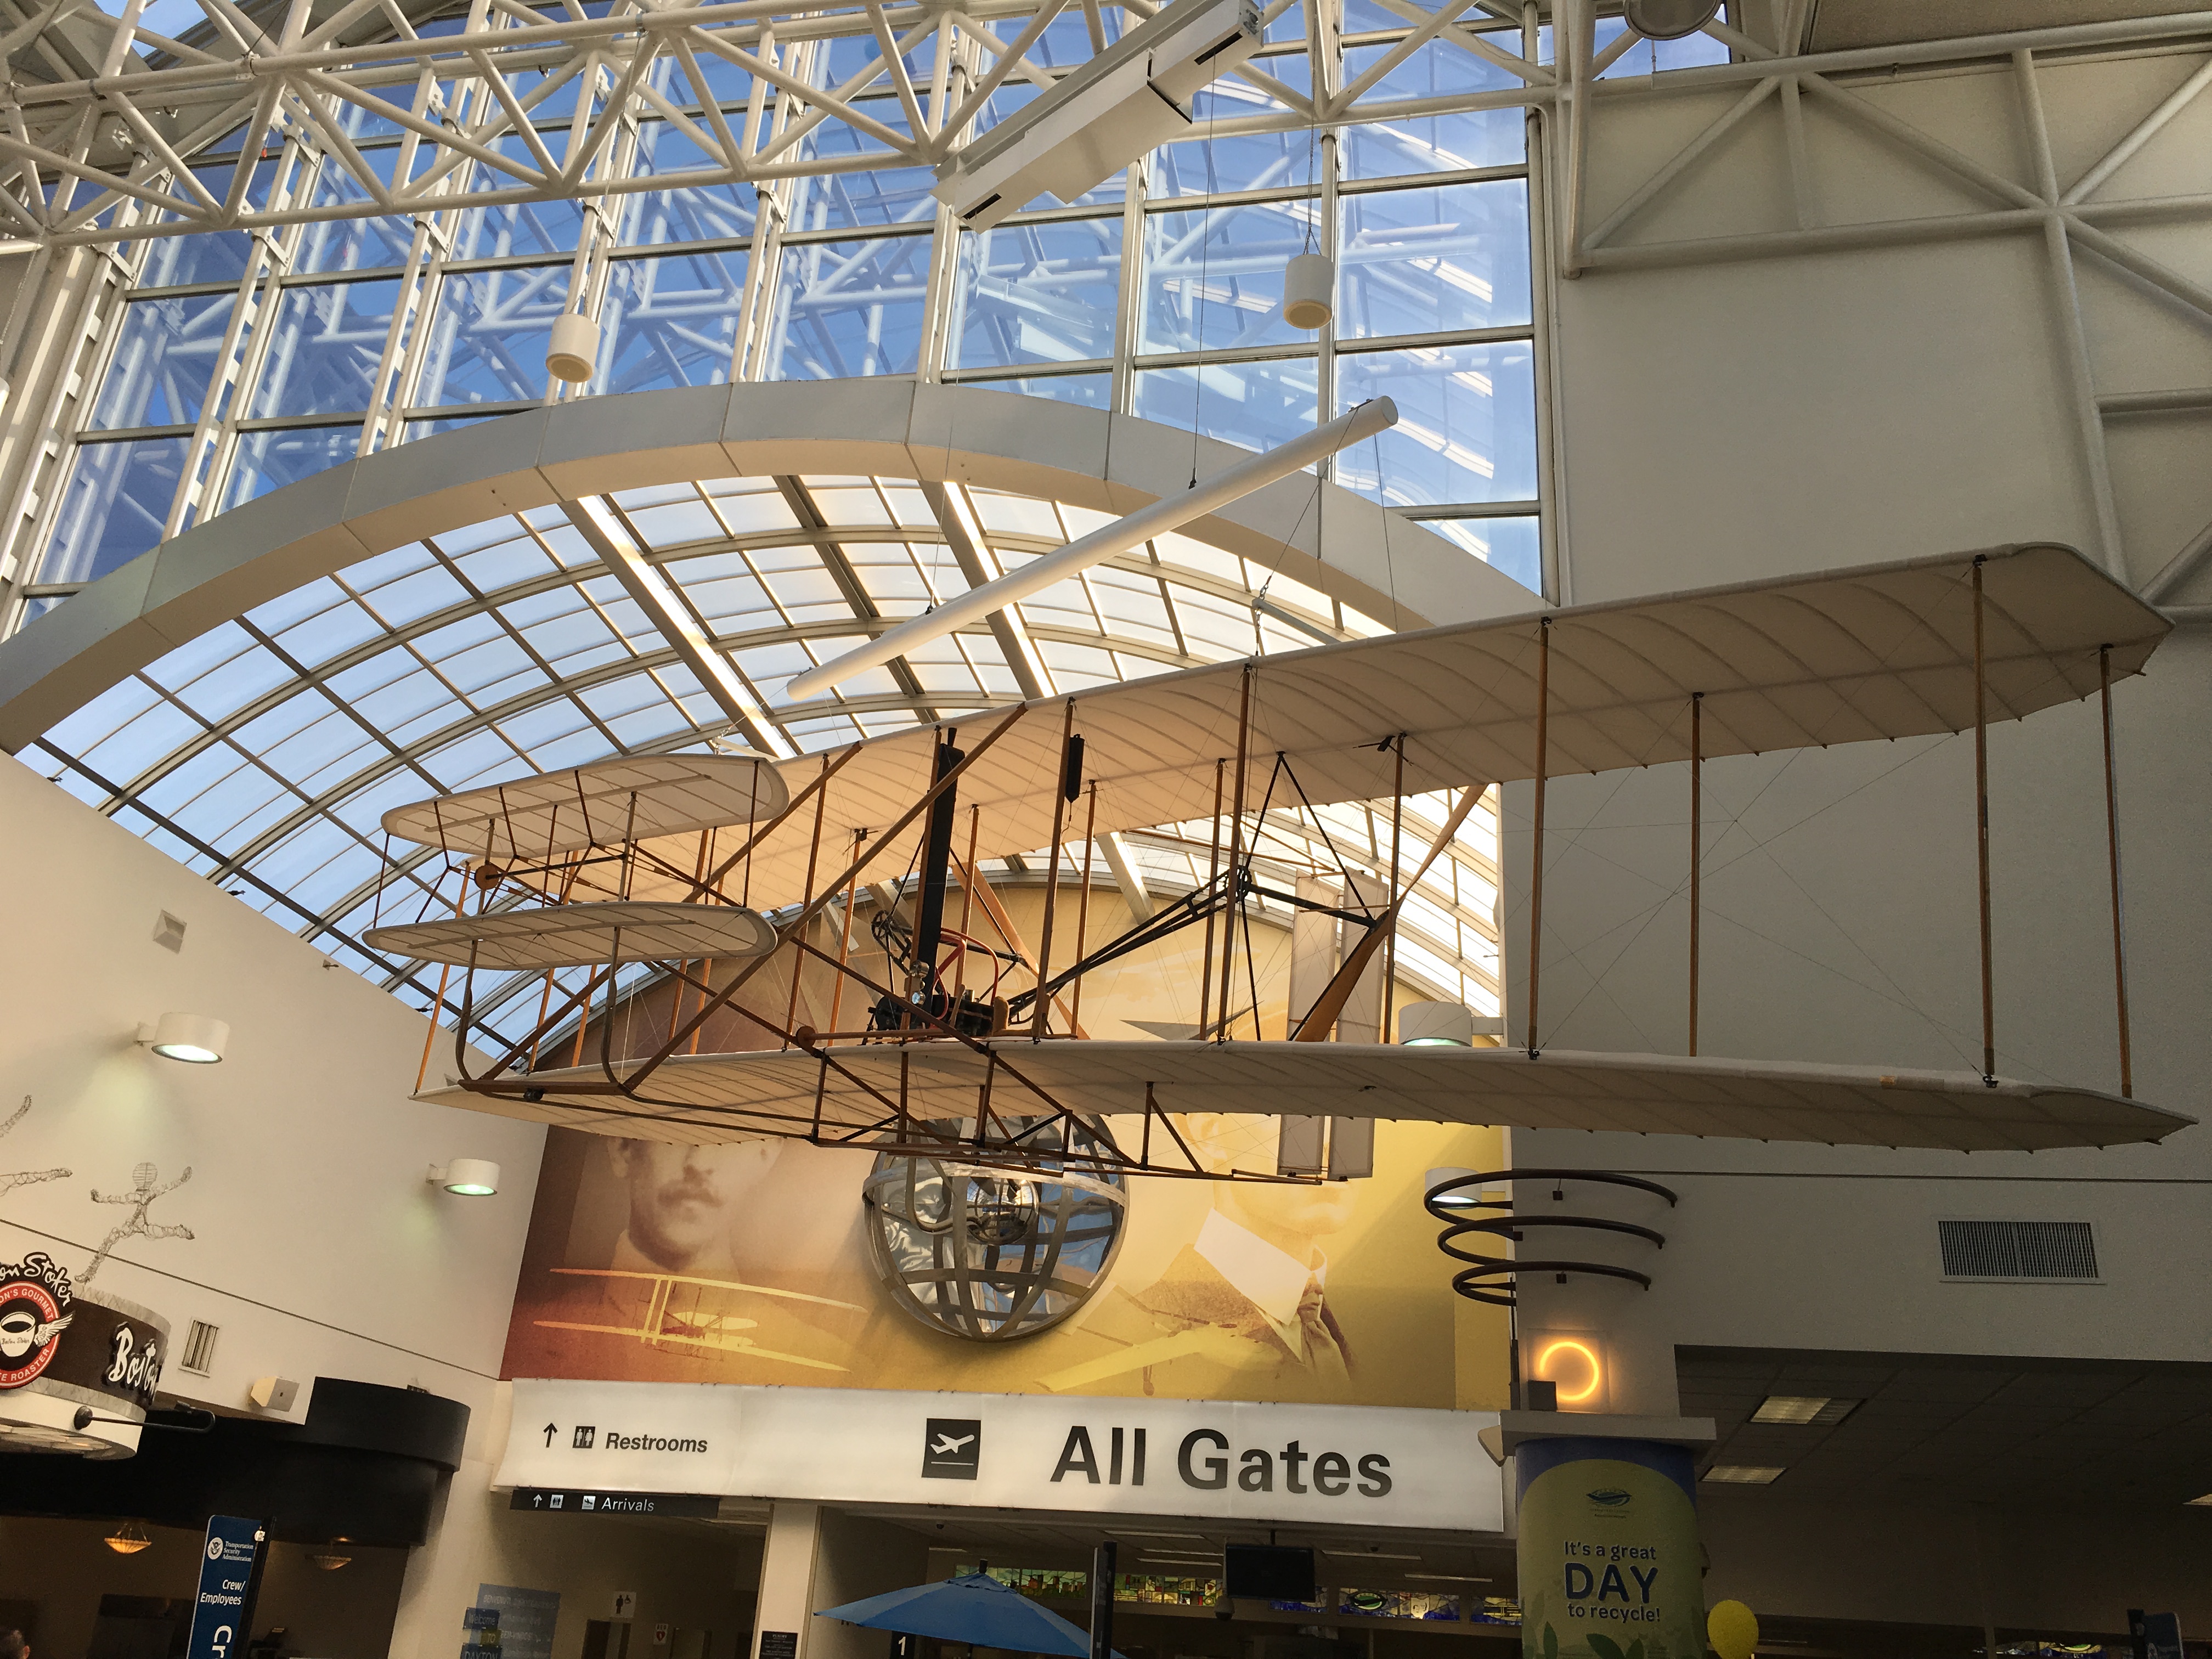 Wright Flyer replica in the lobby of DAY.